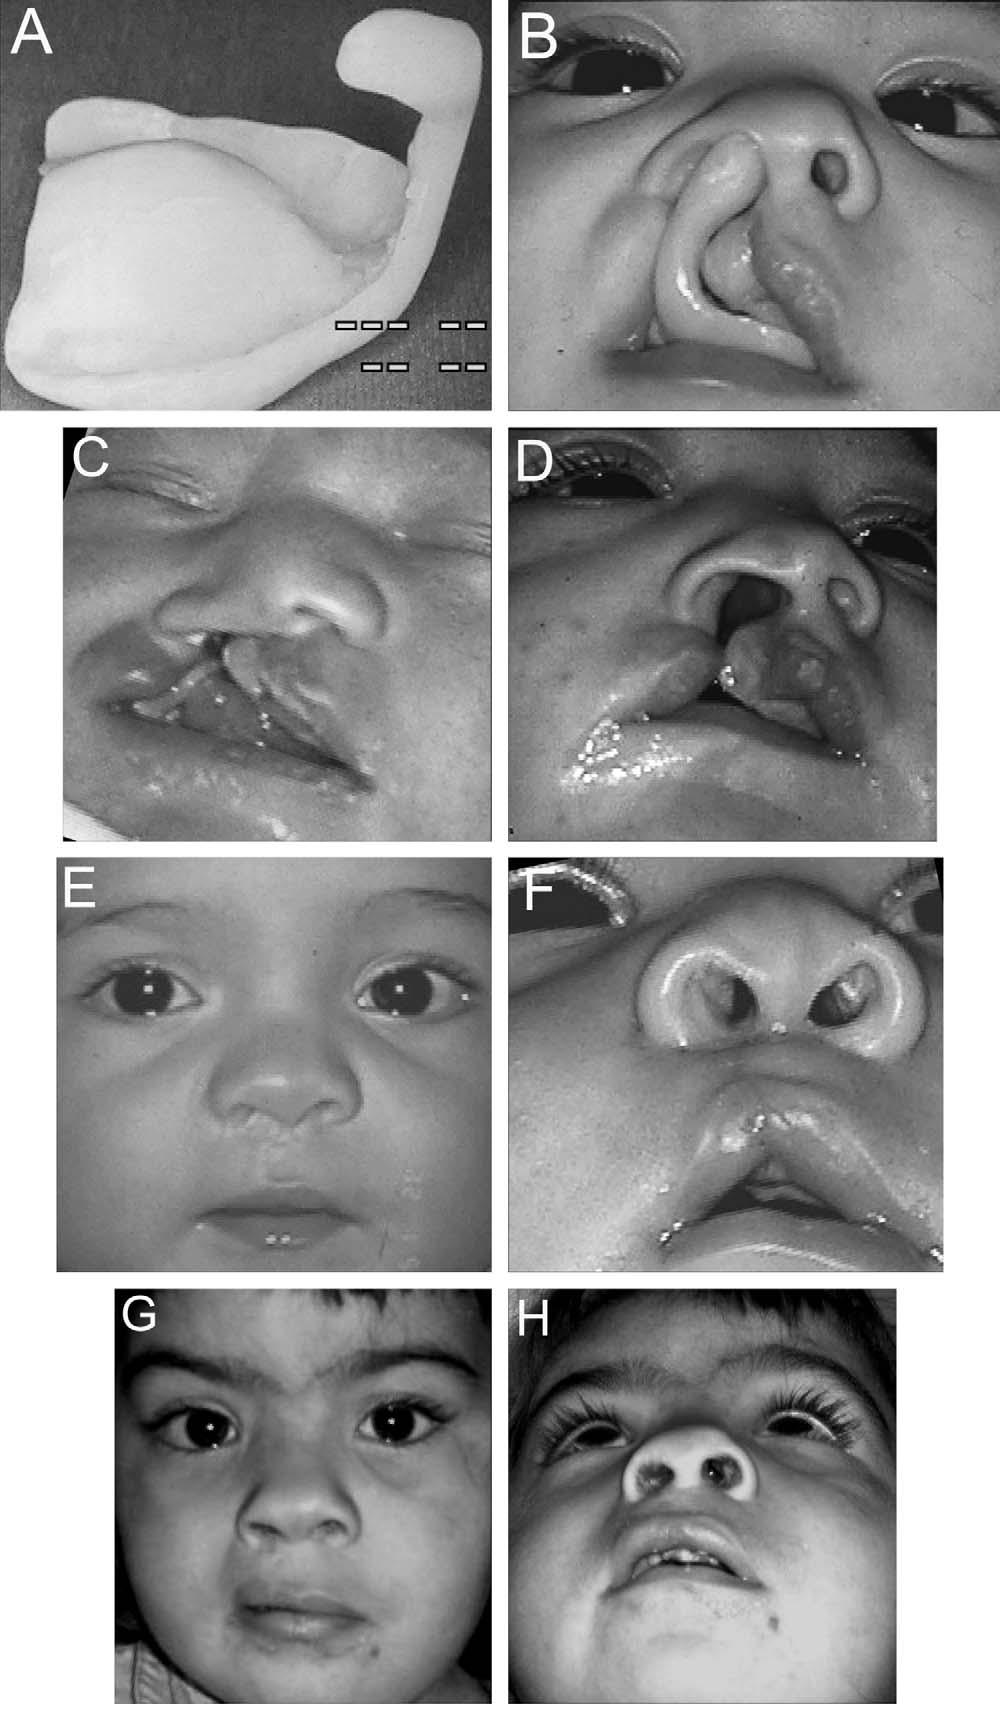 640 Cleft Palate Craniofacial Journal, November 2006, Vol. 43 No. 6 FIGURE 1 Patient with complete unilateral cleft lip and palate.